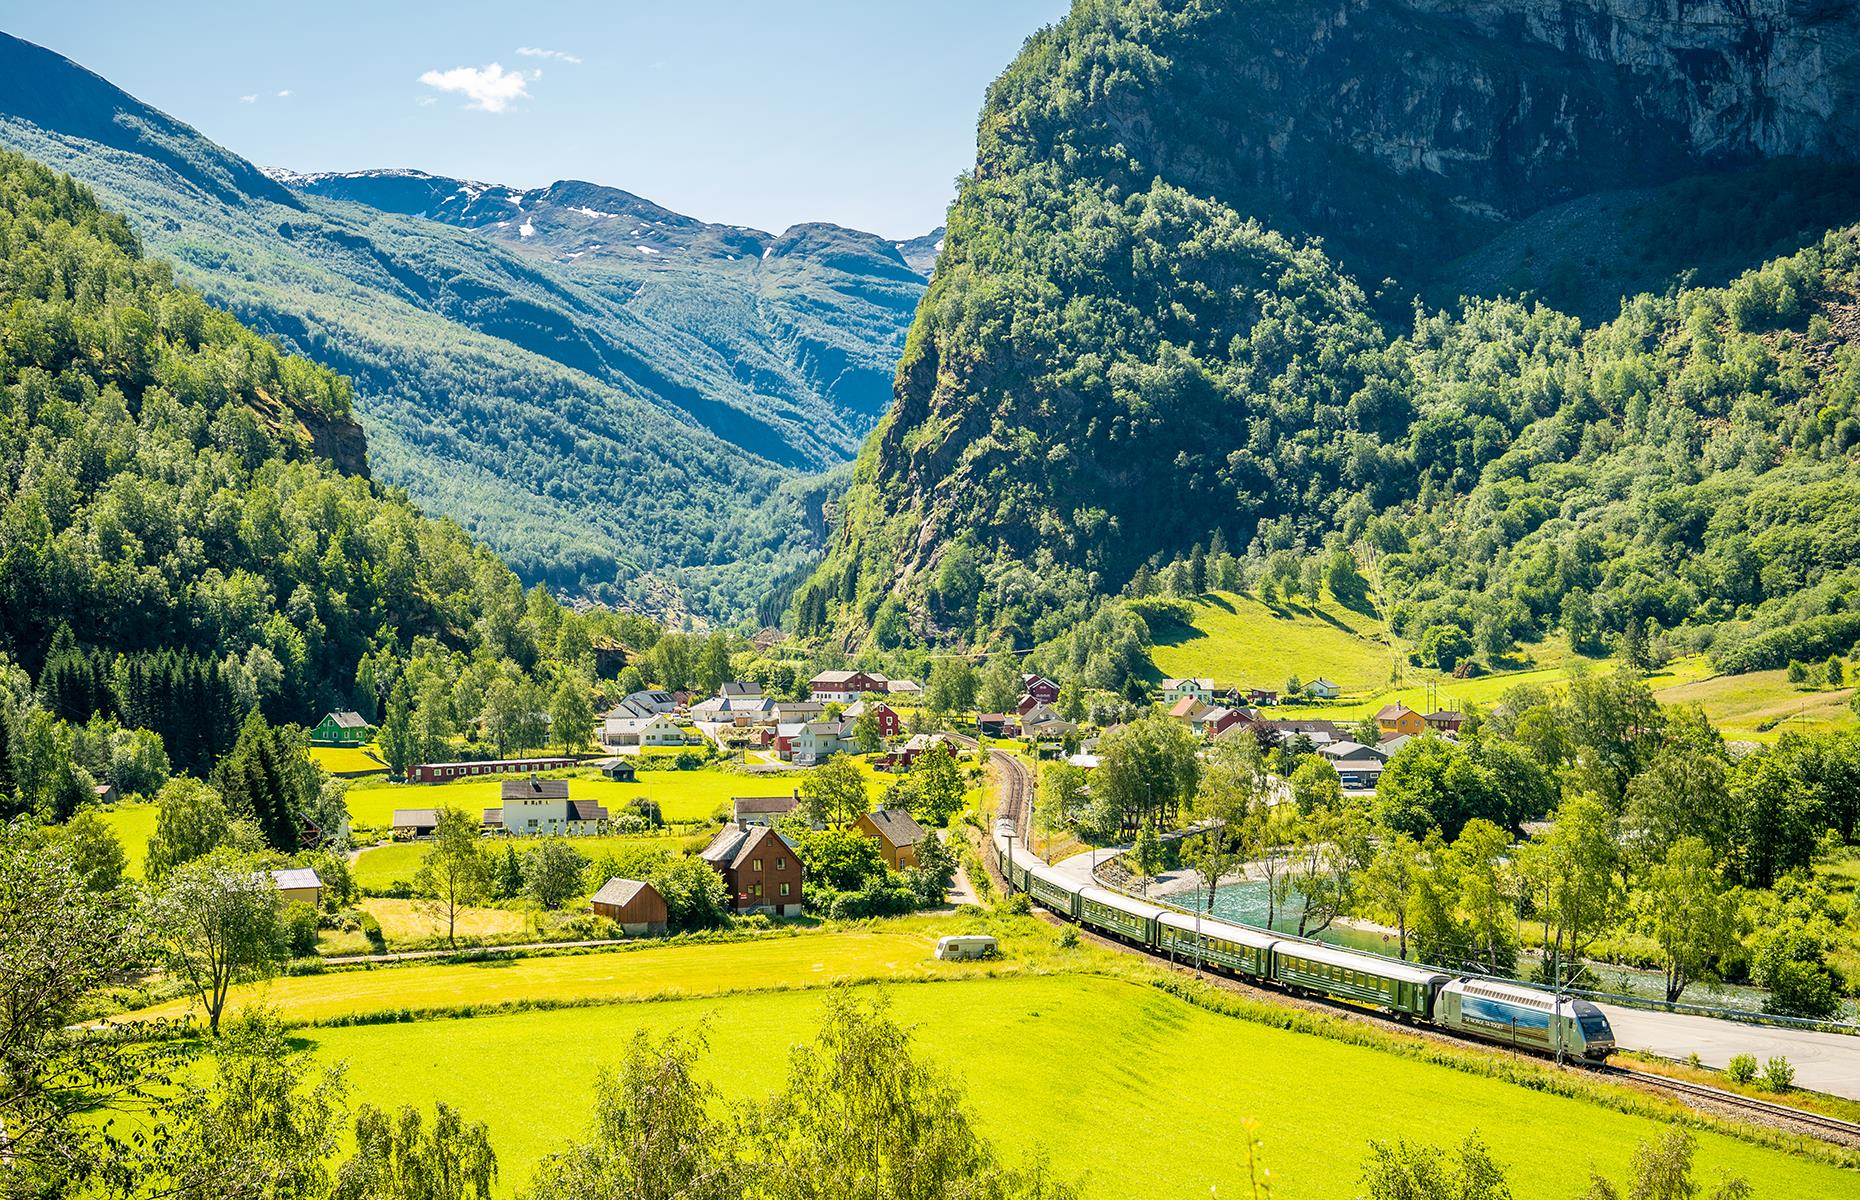 Passing deep ravines, cascading waterfalls and towering peaks, the journey is equally stunning in both summer and winter, when a blanket of snow turns the green landscape into a winter wonderland. The Flåm Railway connects with trains running between Oslo and Bergen, and one-way fares start from $50 (£40).